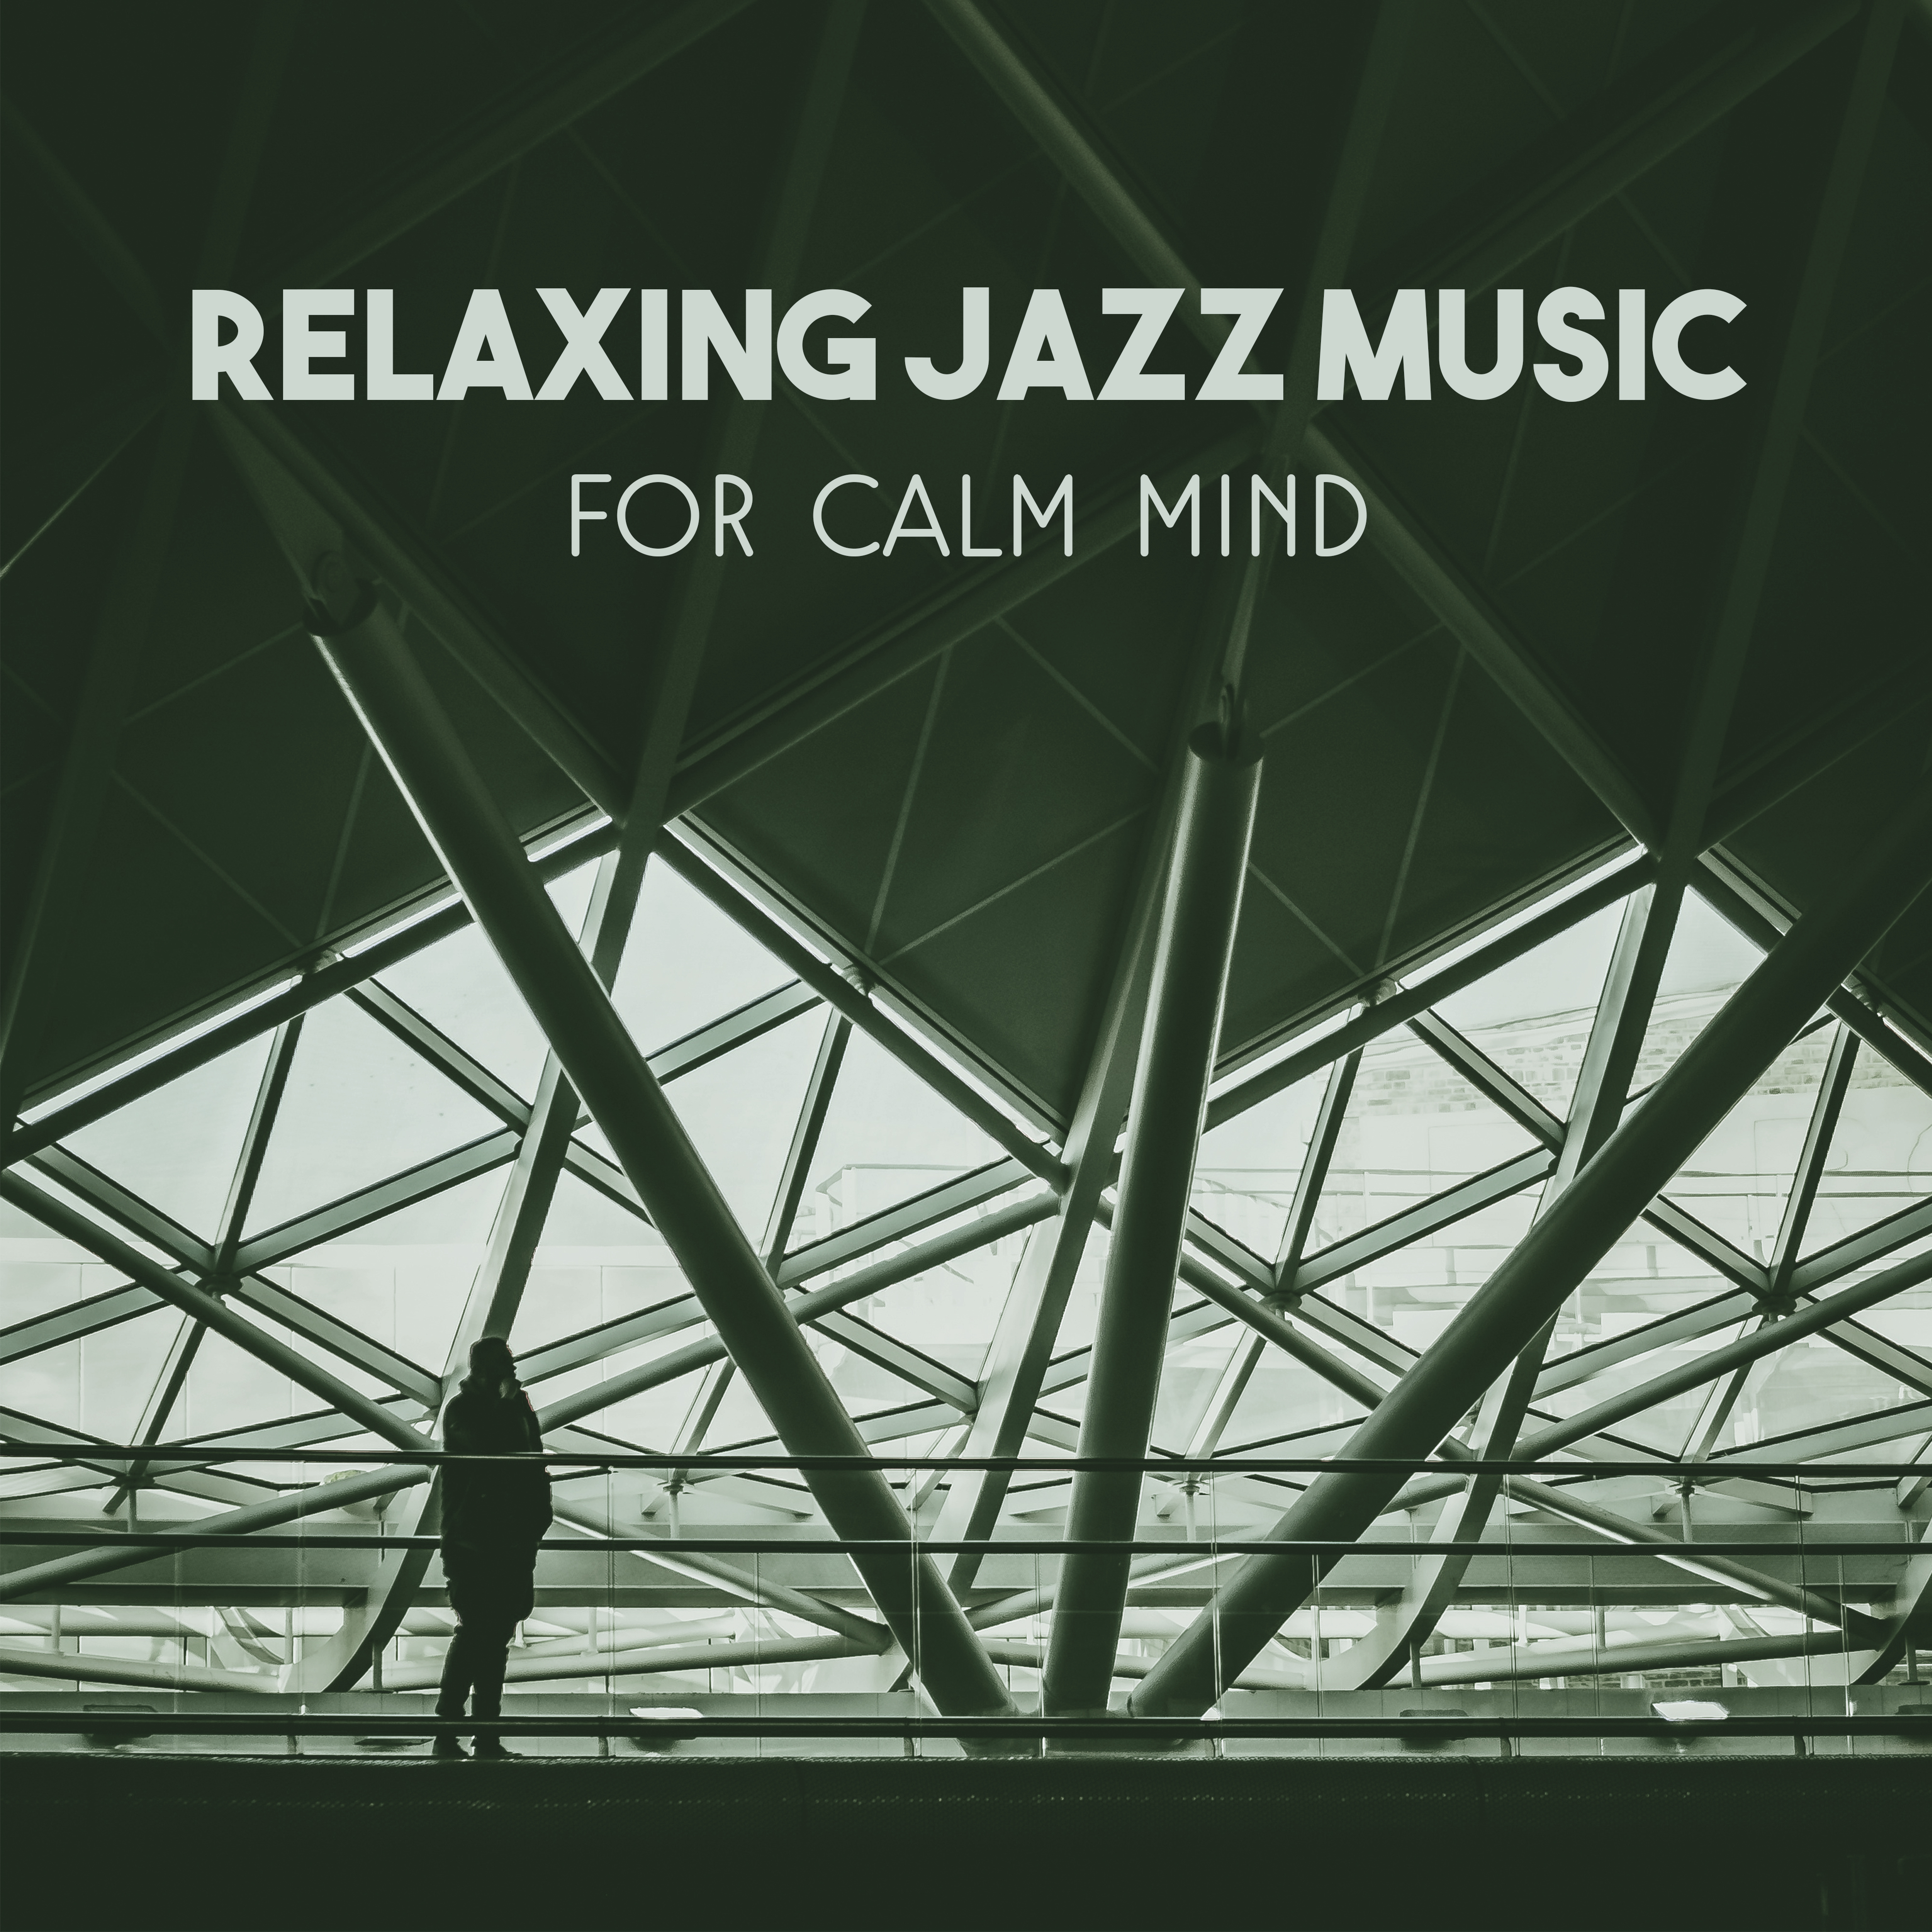 Relaxing Jazz Music for Calm Mind  Soothing Jazz Music, Rest Sounds, Jazz Club, Moonlight Piano